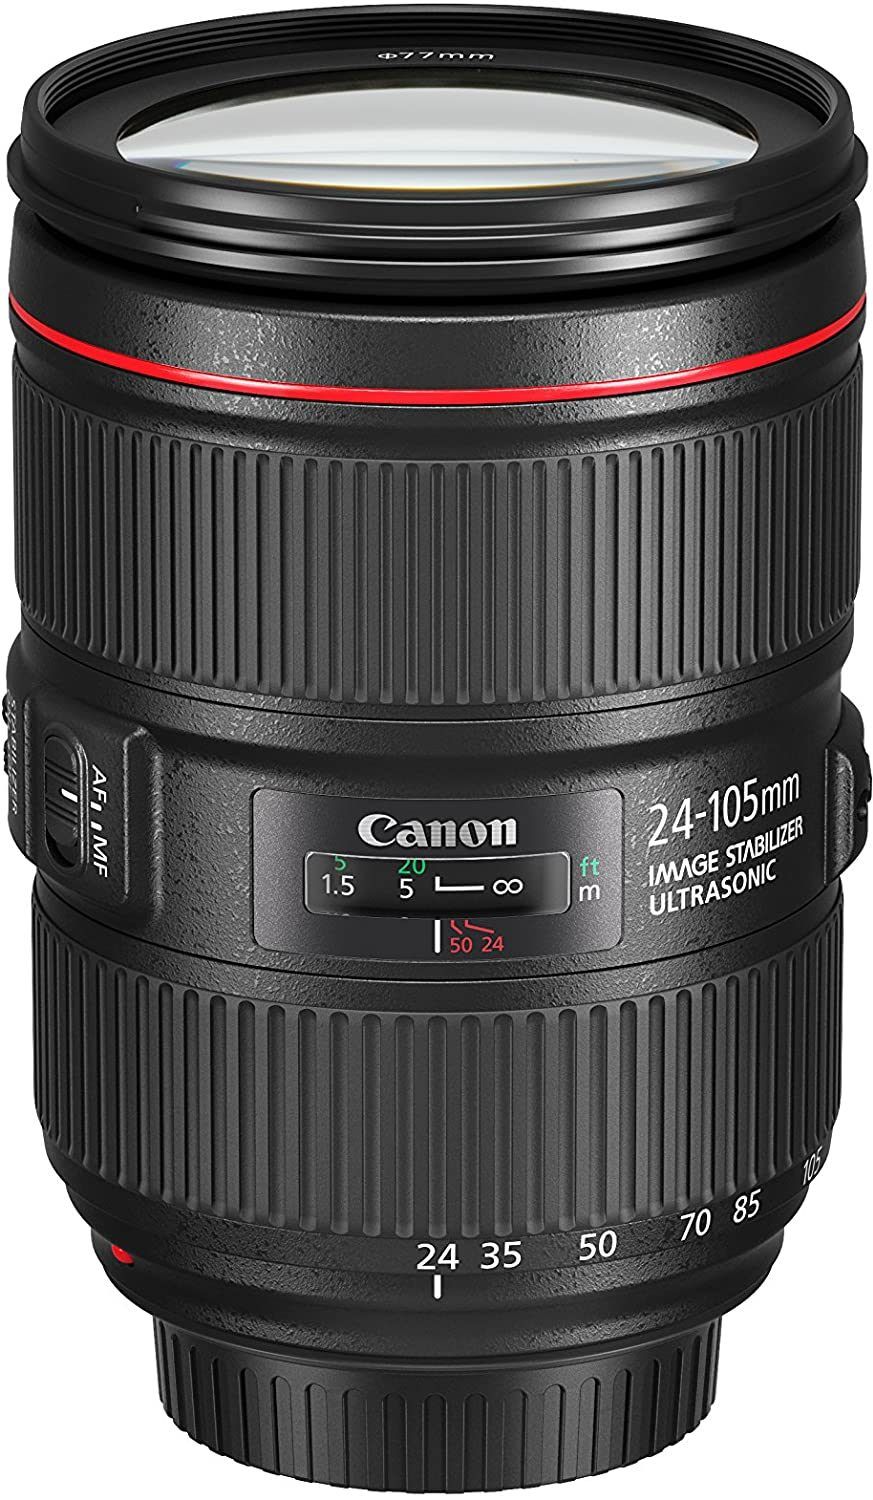 canon lens with low f stop